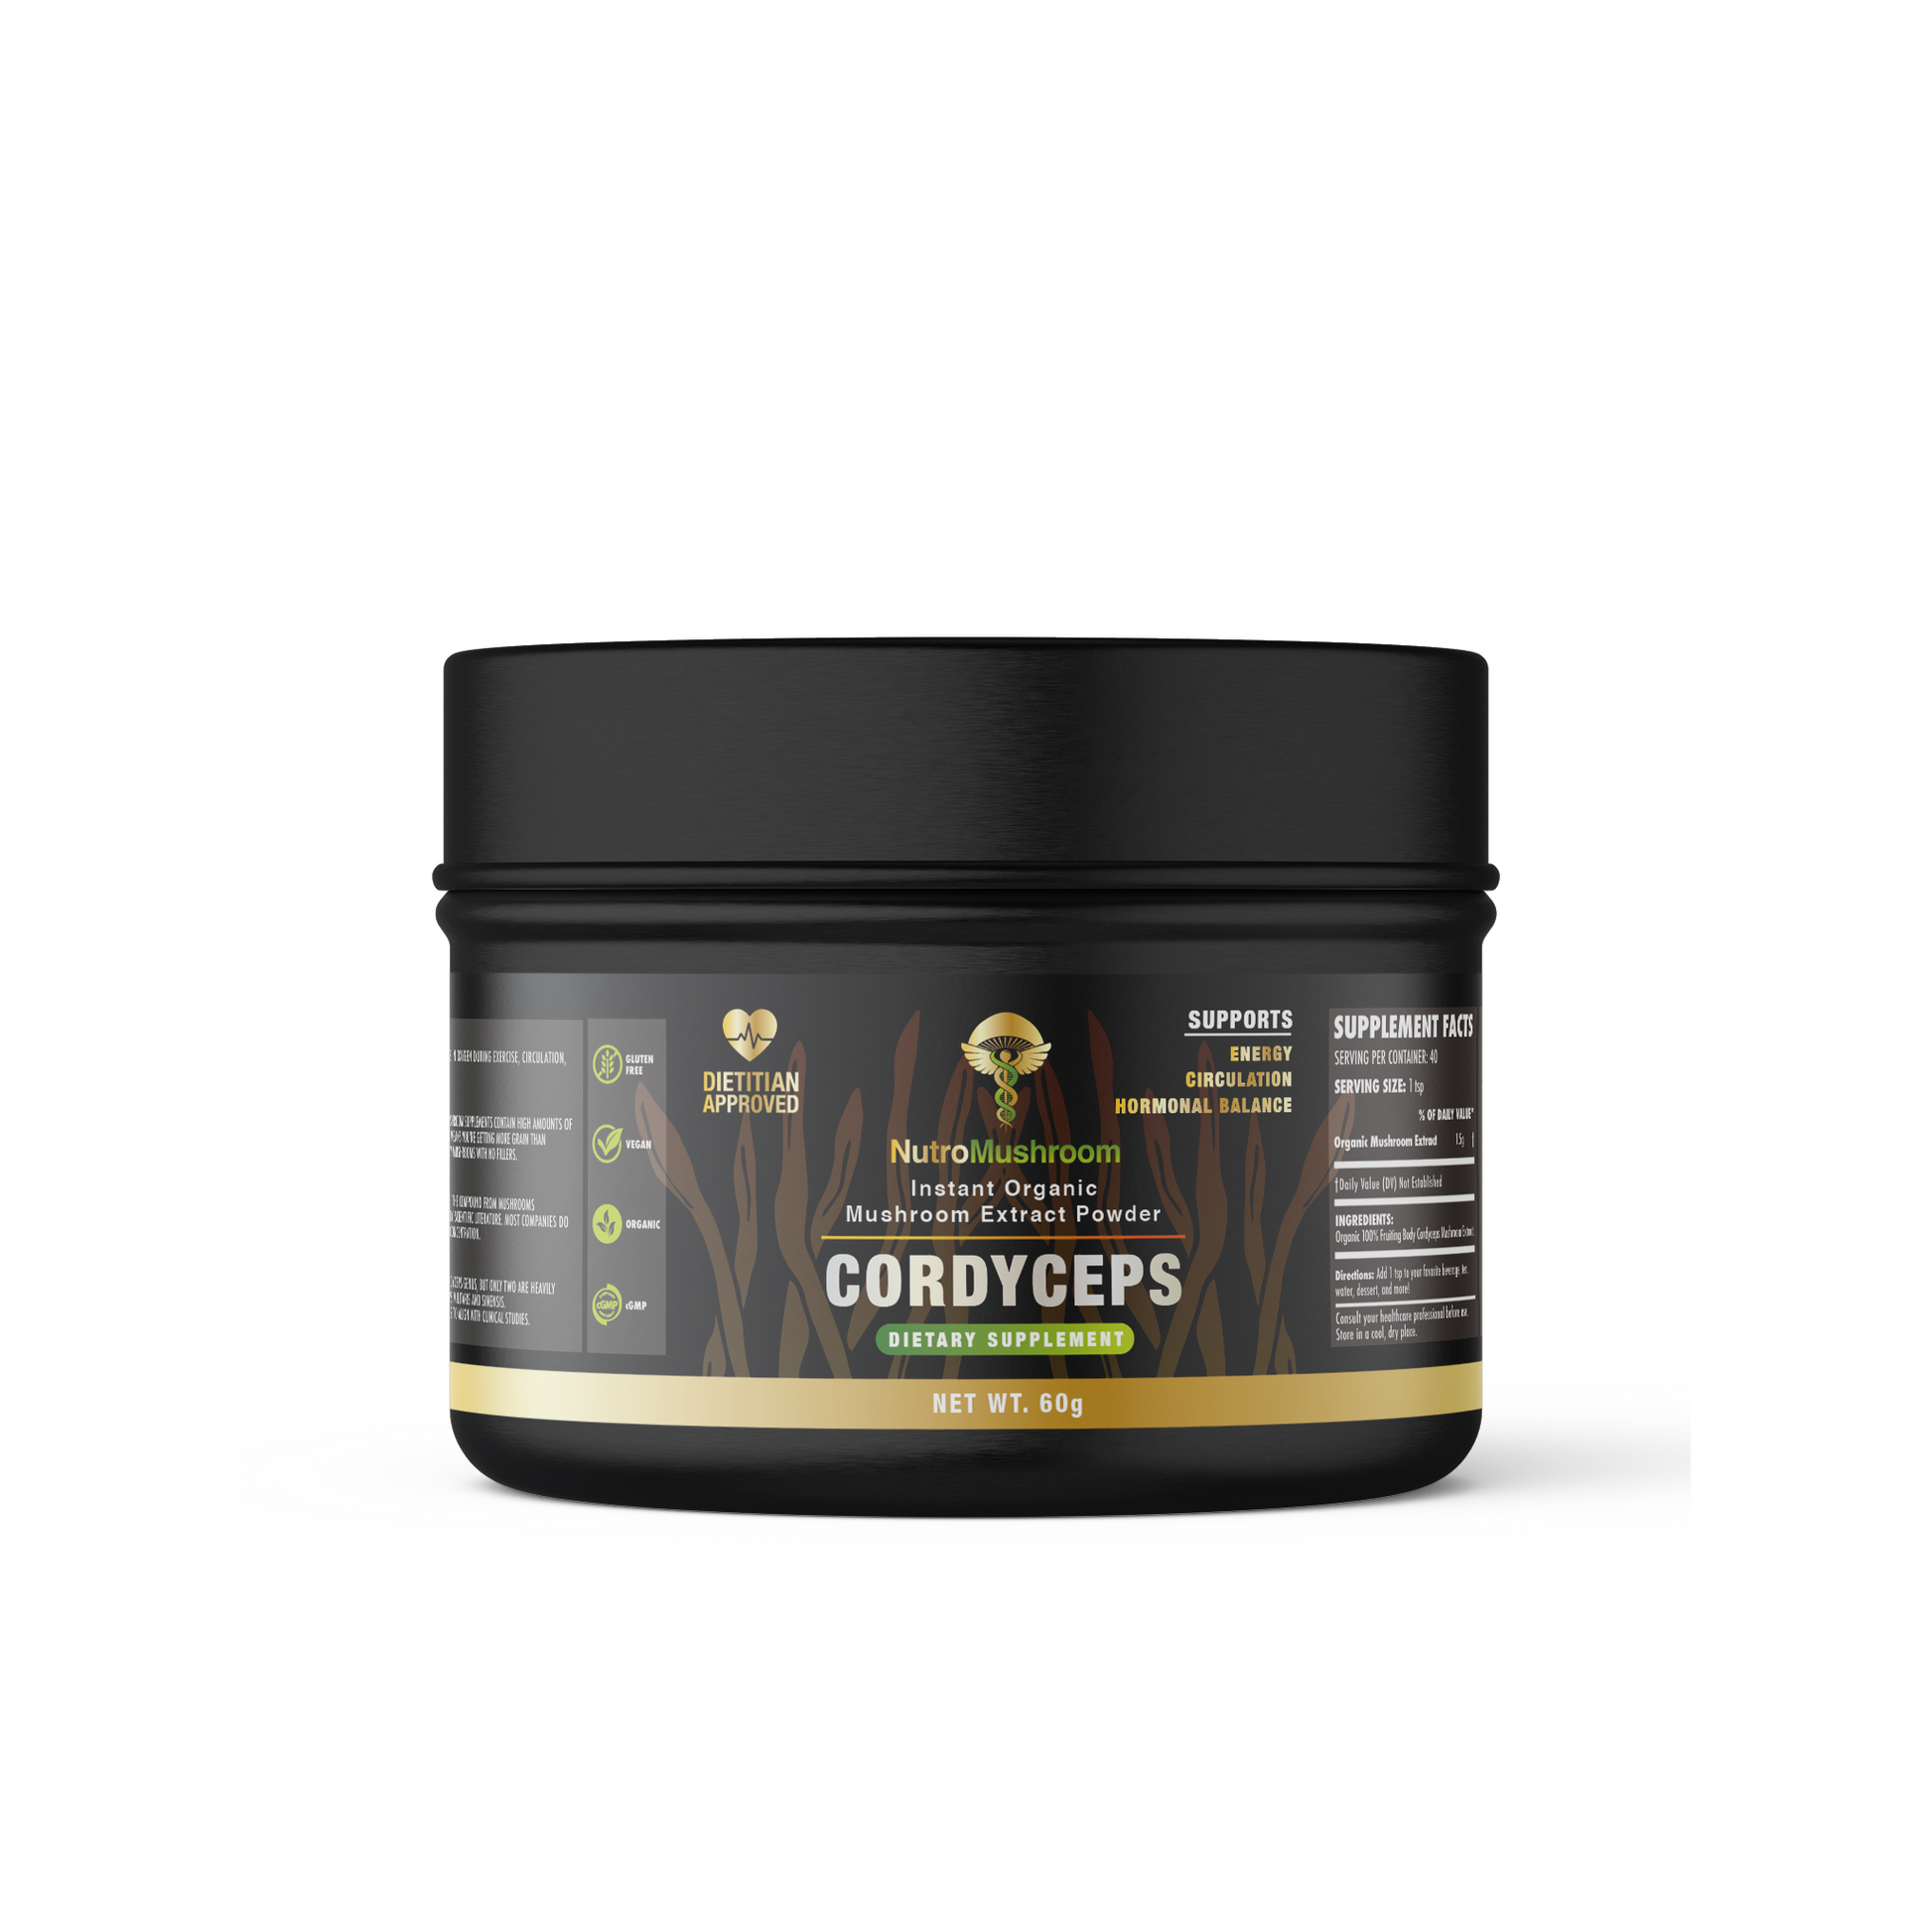  Cordyceps militaris extract powder supplement. The label is wrapped around a zero plastic tin with a Dietitian-approved stamp, organic icon and cordyceps mushrooms in the background. 